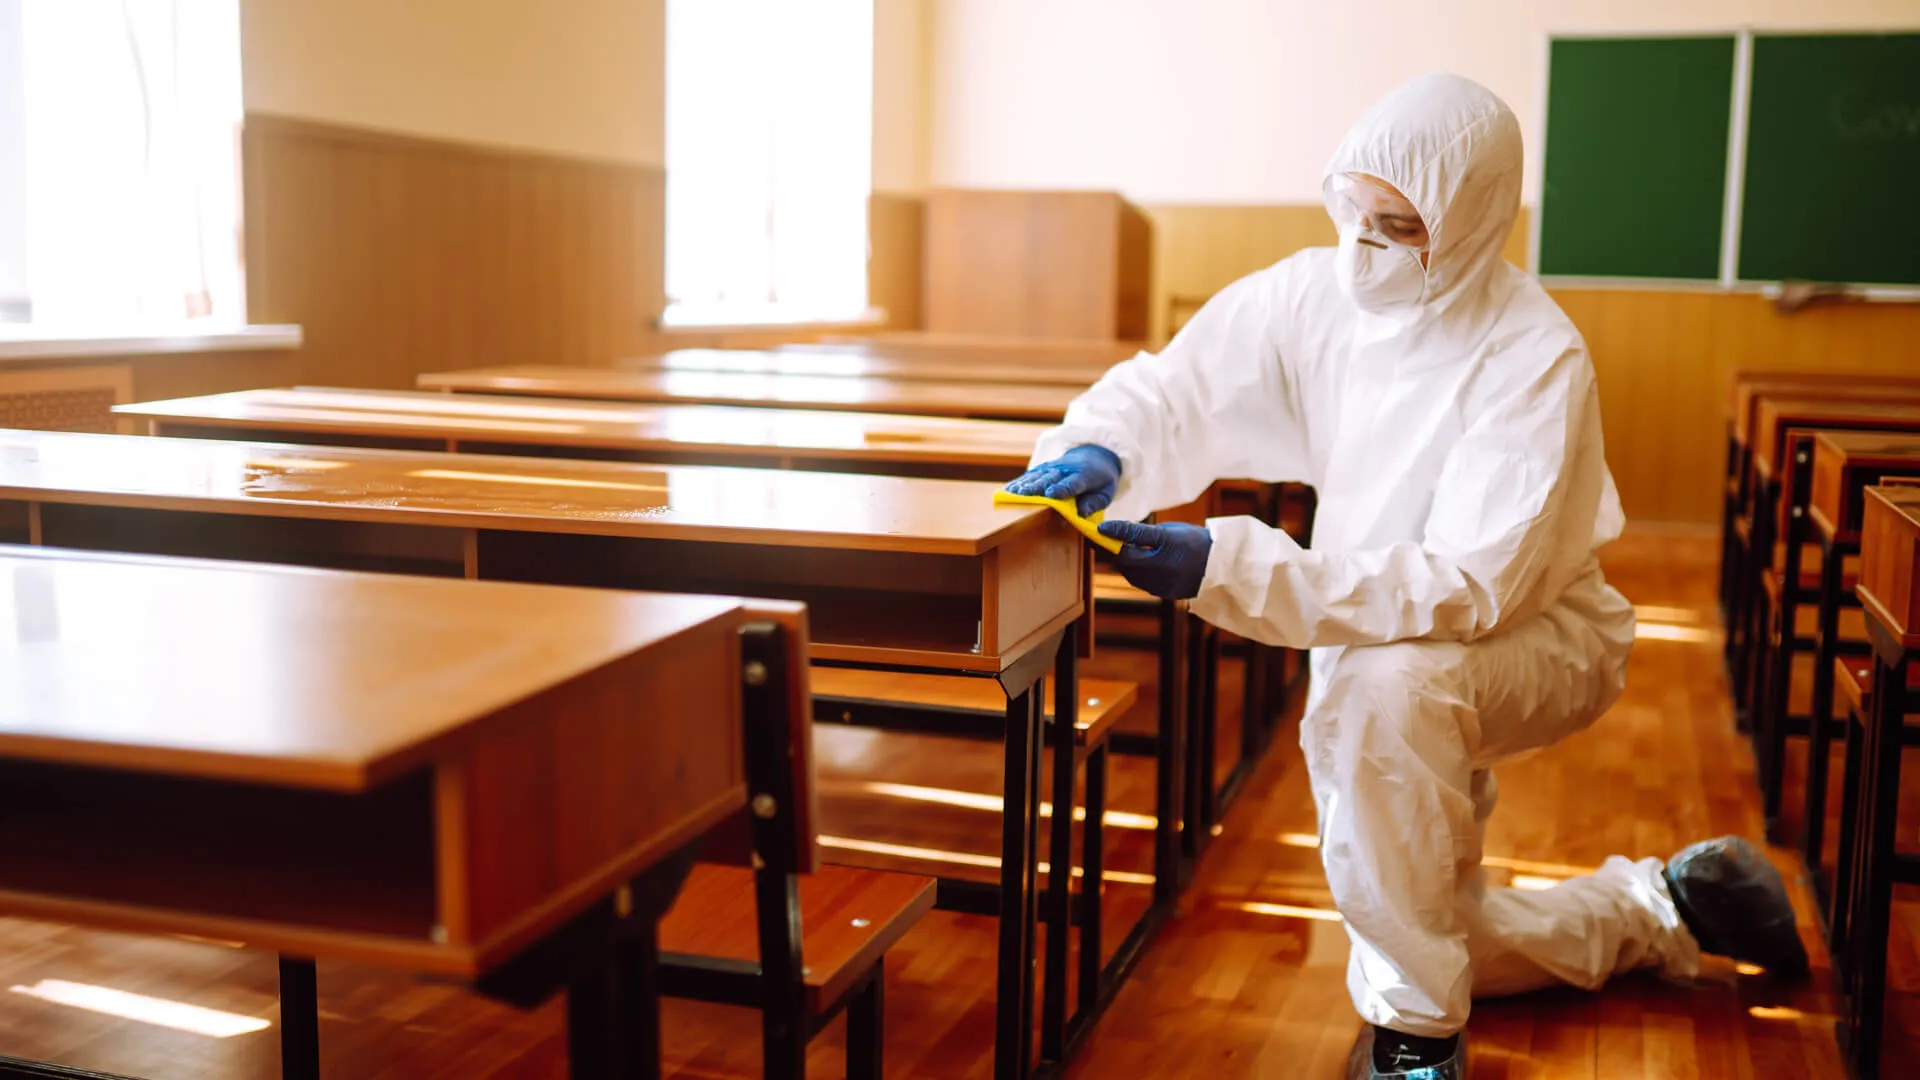 Man in a protective suit washes school desk.